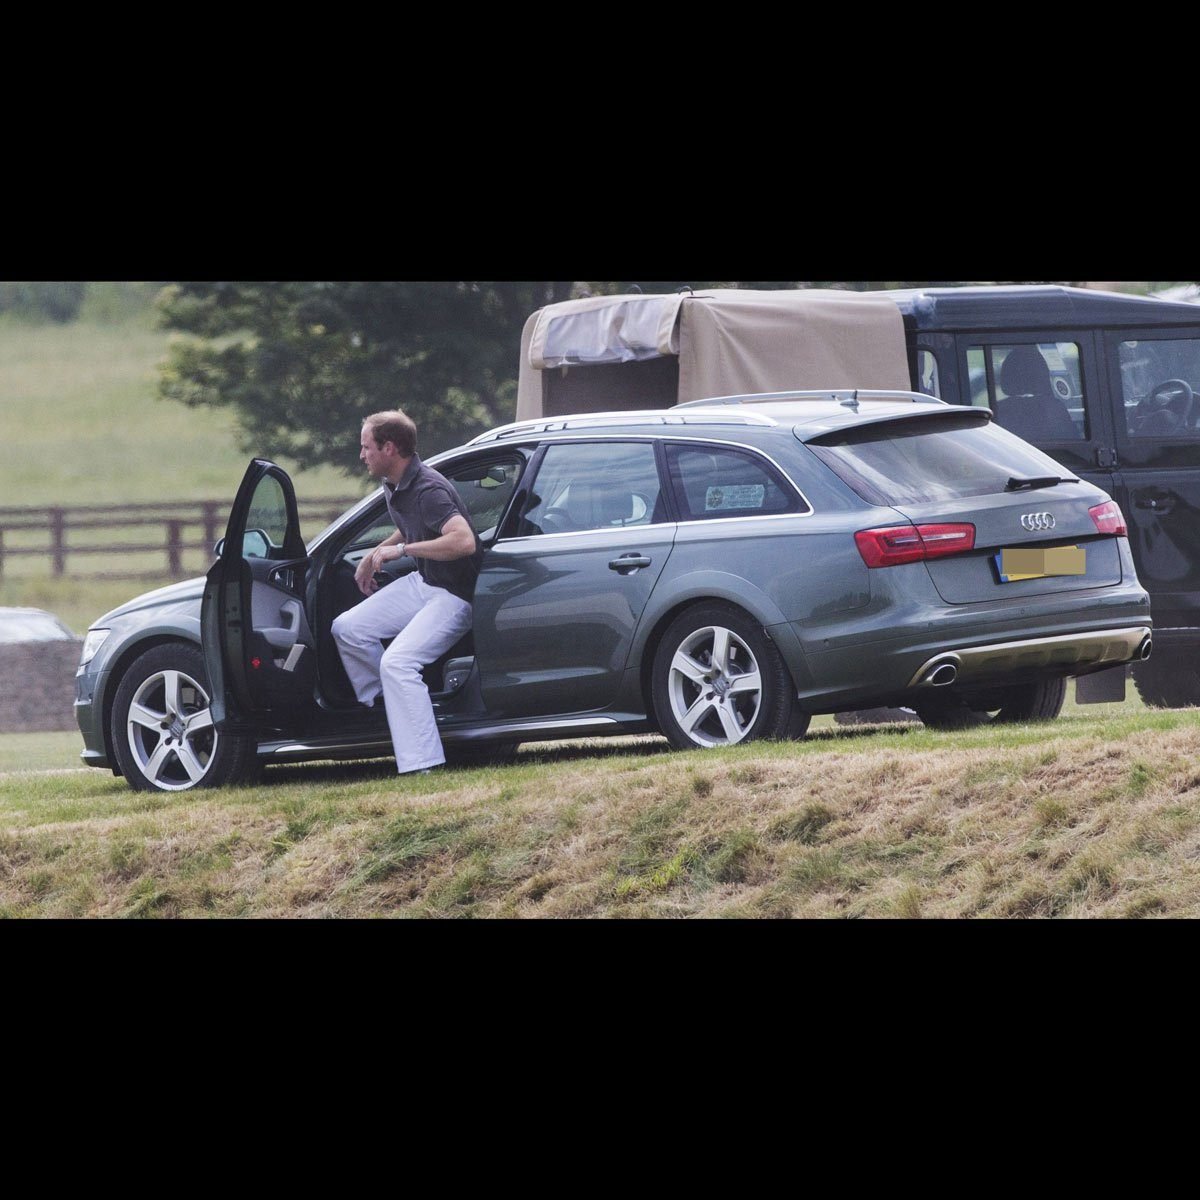 Prince William gets out of Prince Charles' Audi wagon in the country